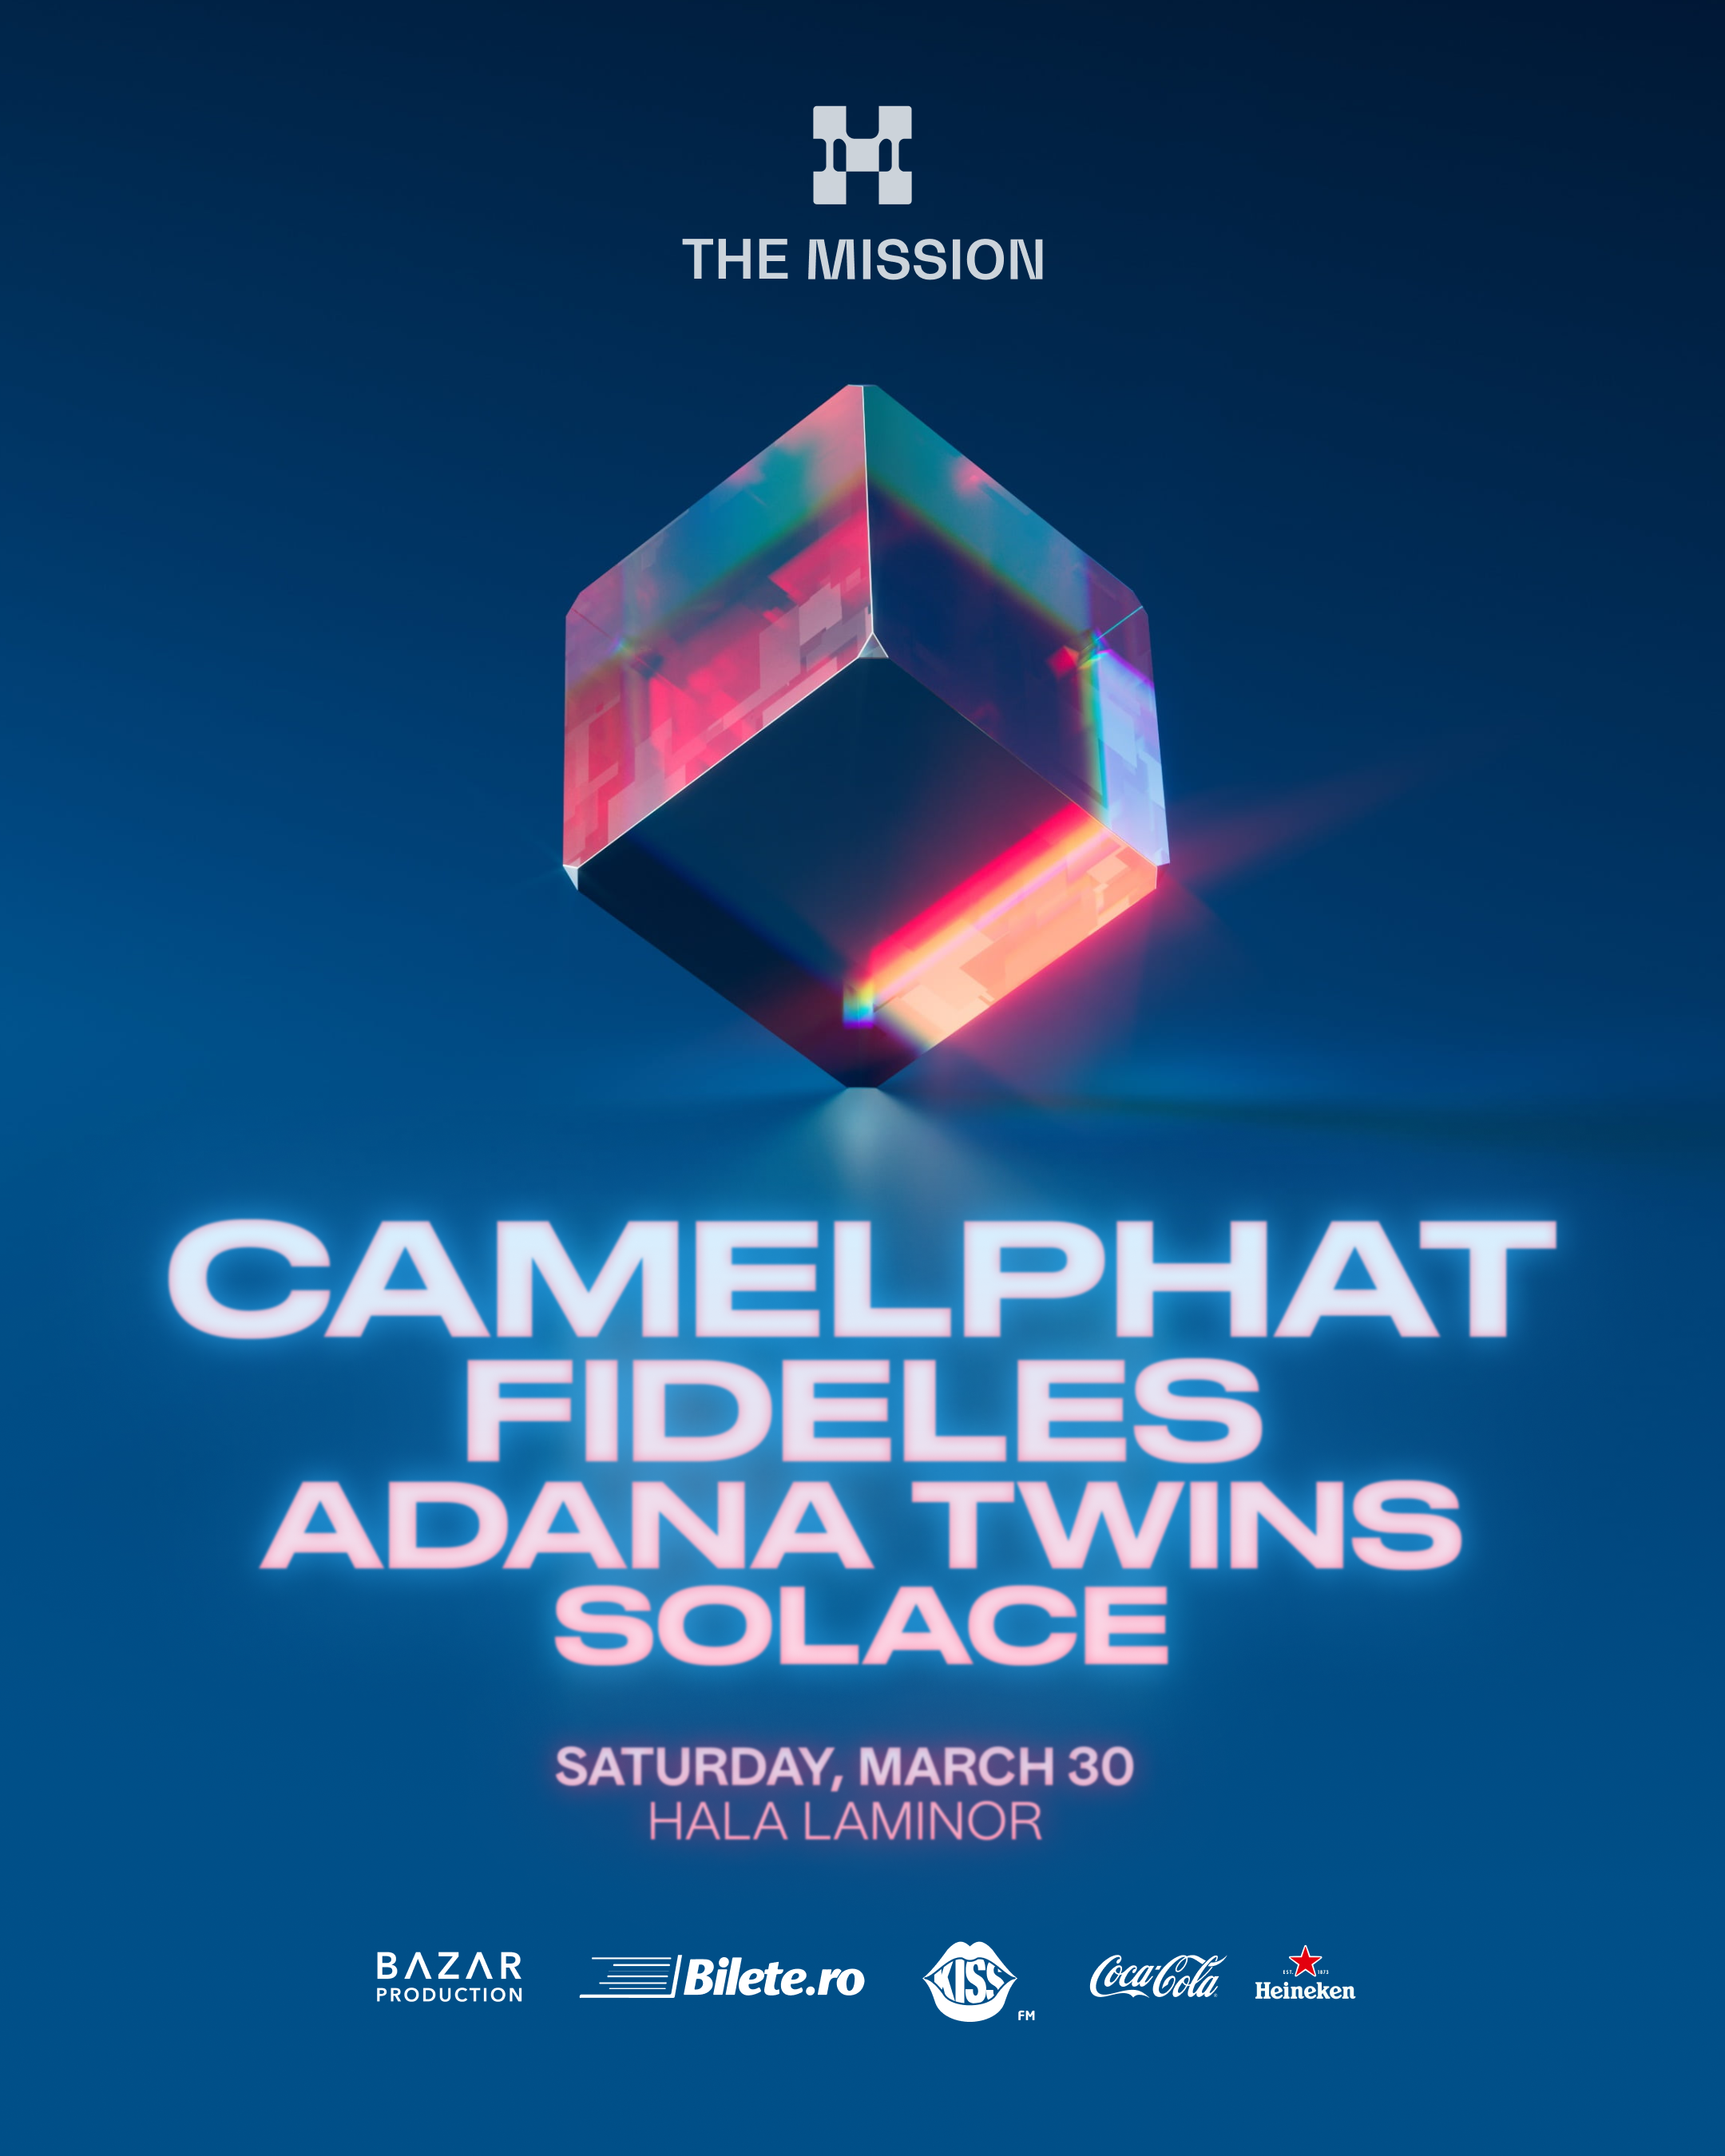 The Mission pres. CamelPhat, Fideles, Adana Twins & Solace - フライヤー表